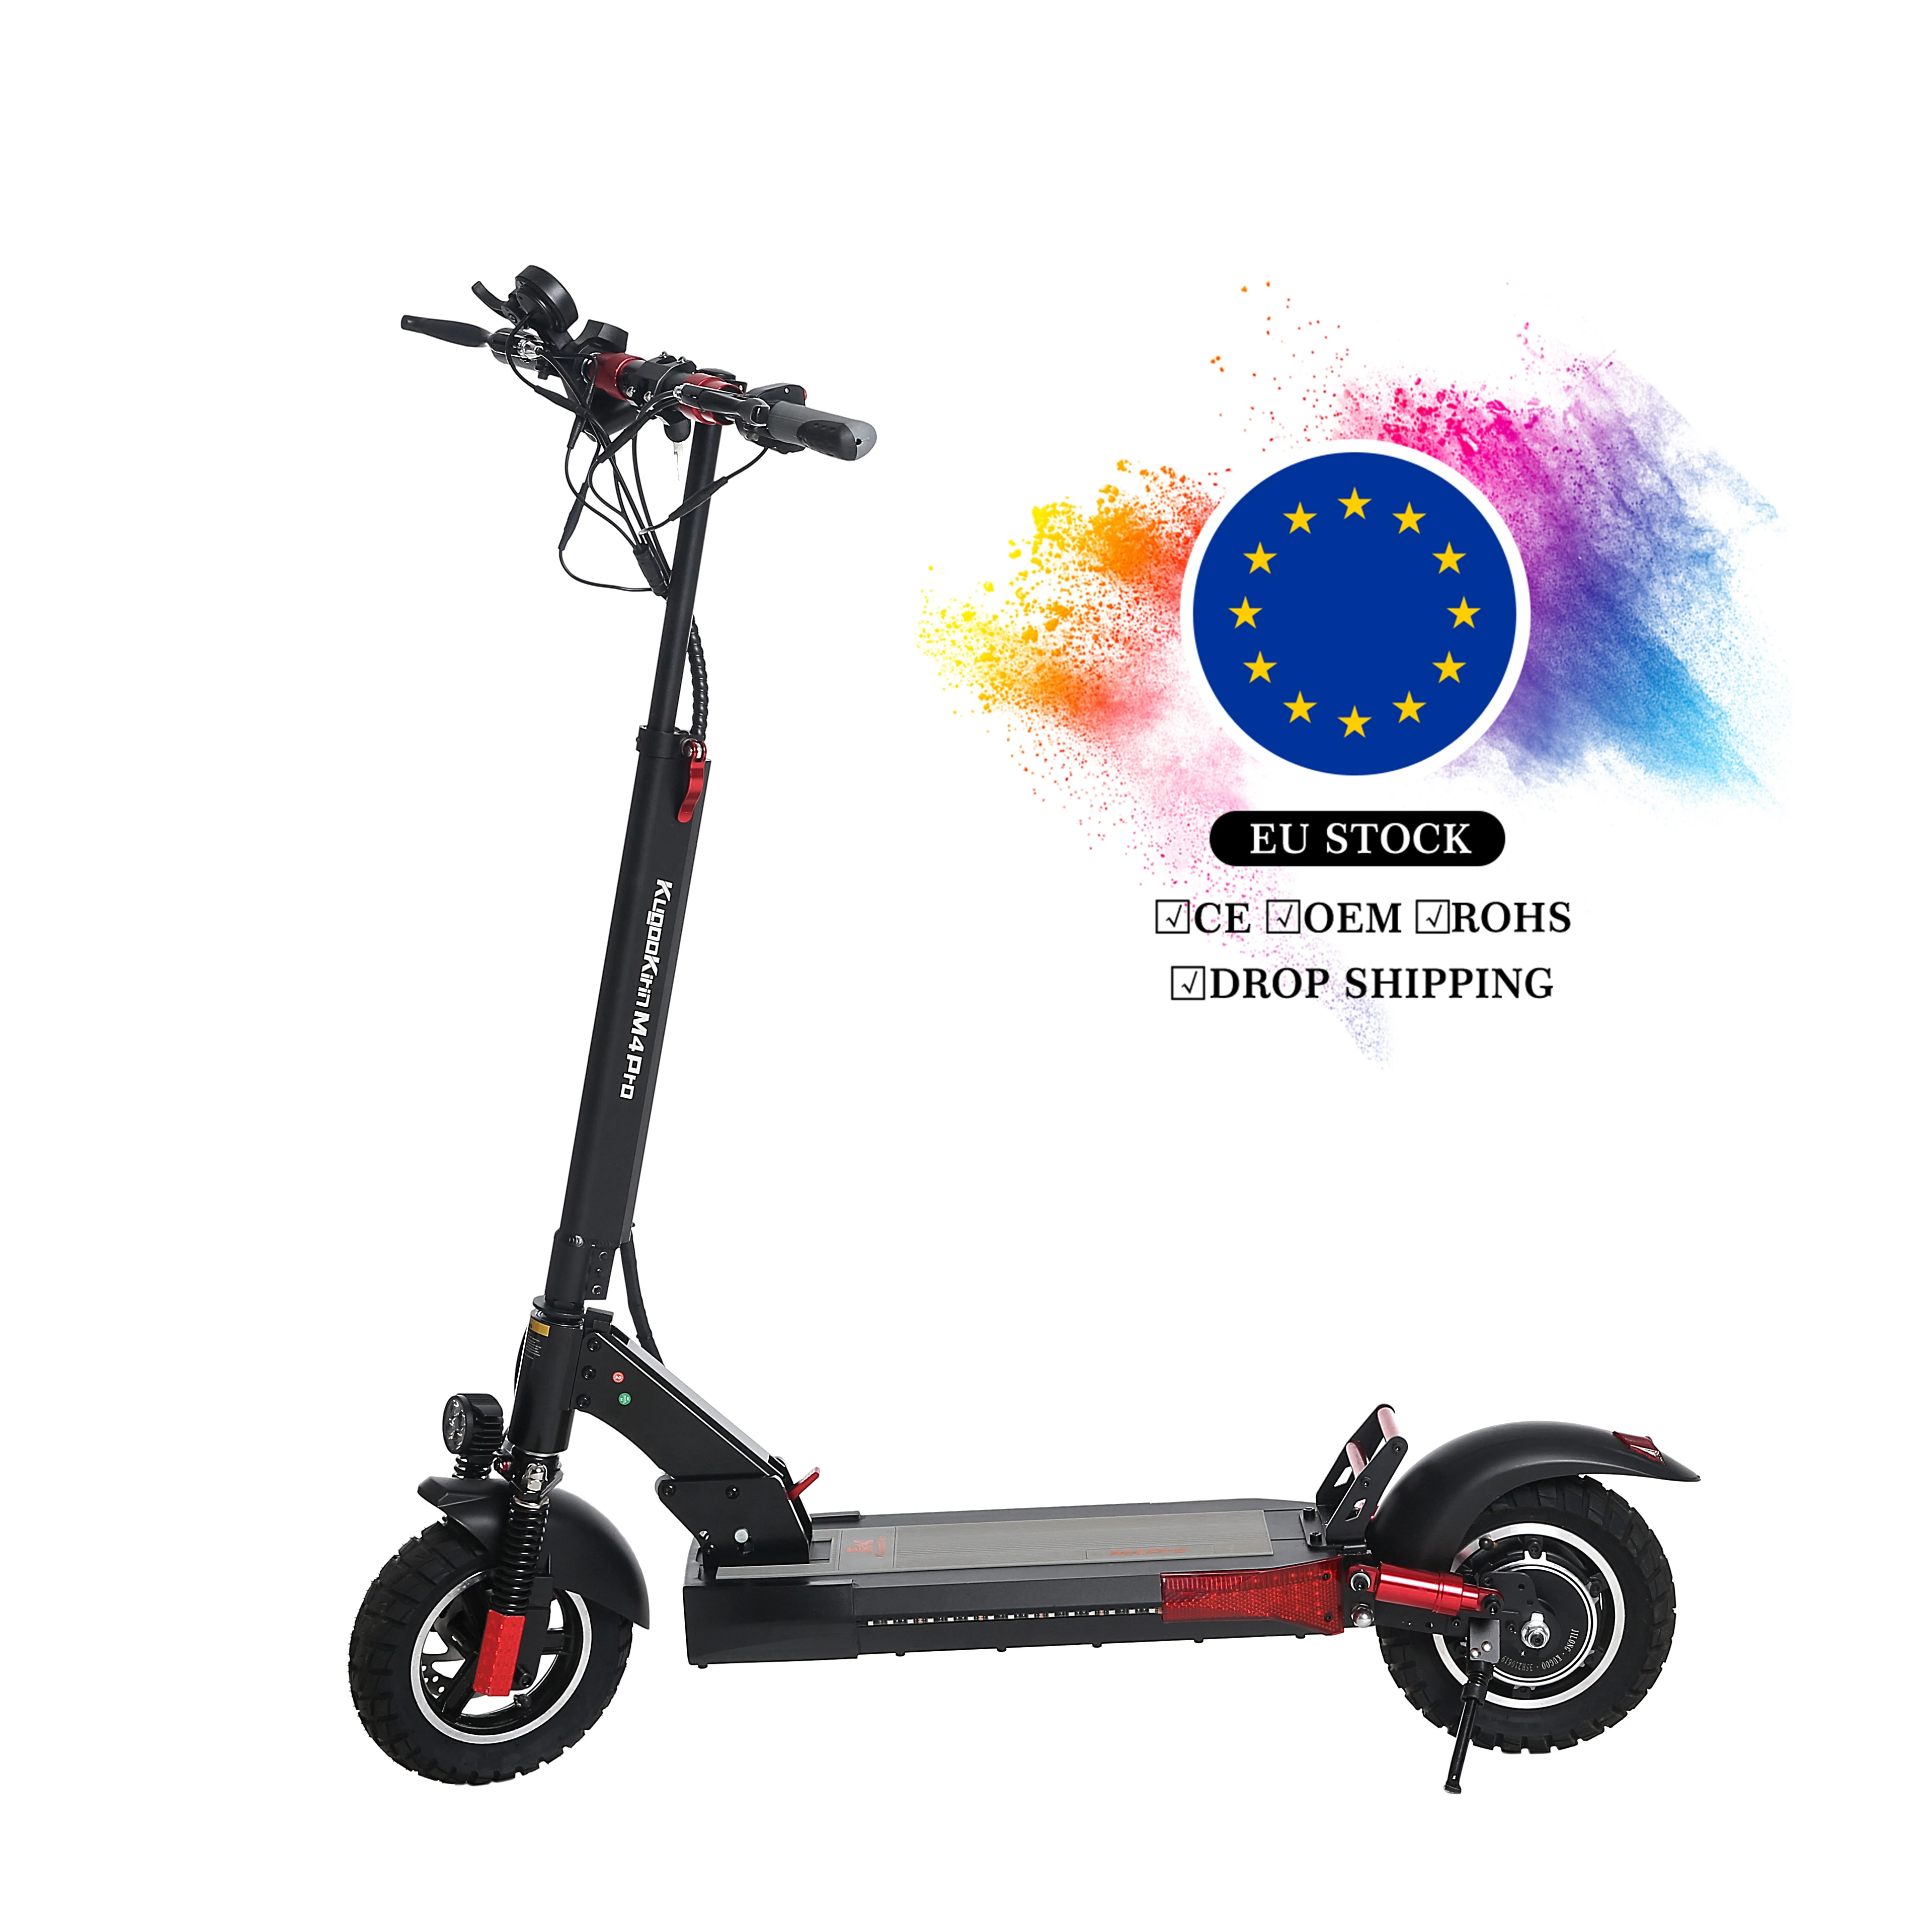 (EU Warehouse) 2021 trends electric scooter Kugoo kirin M4 Pro 48V 16AH 500W folding mobility scooter in stock., Black+red